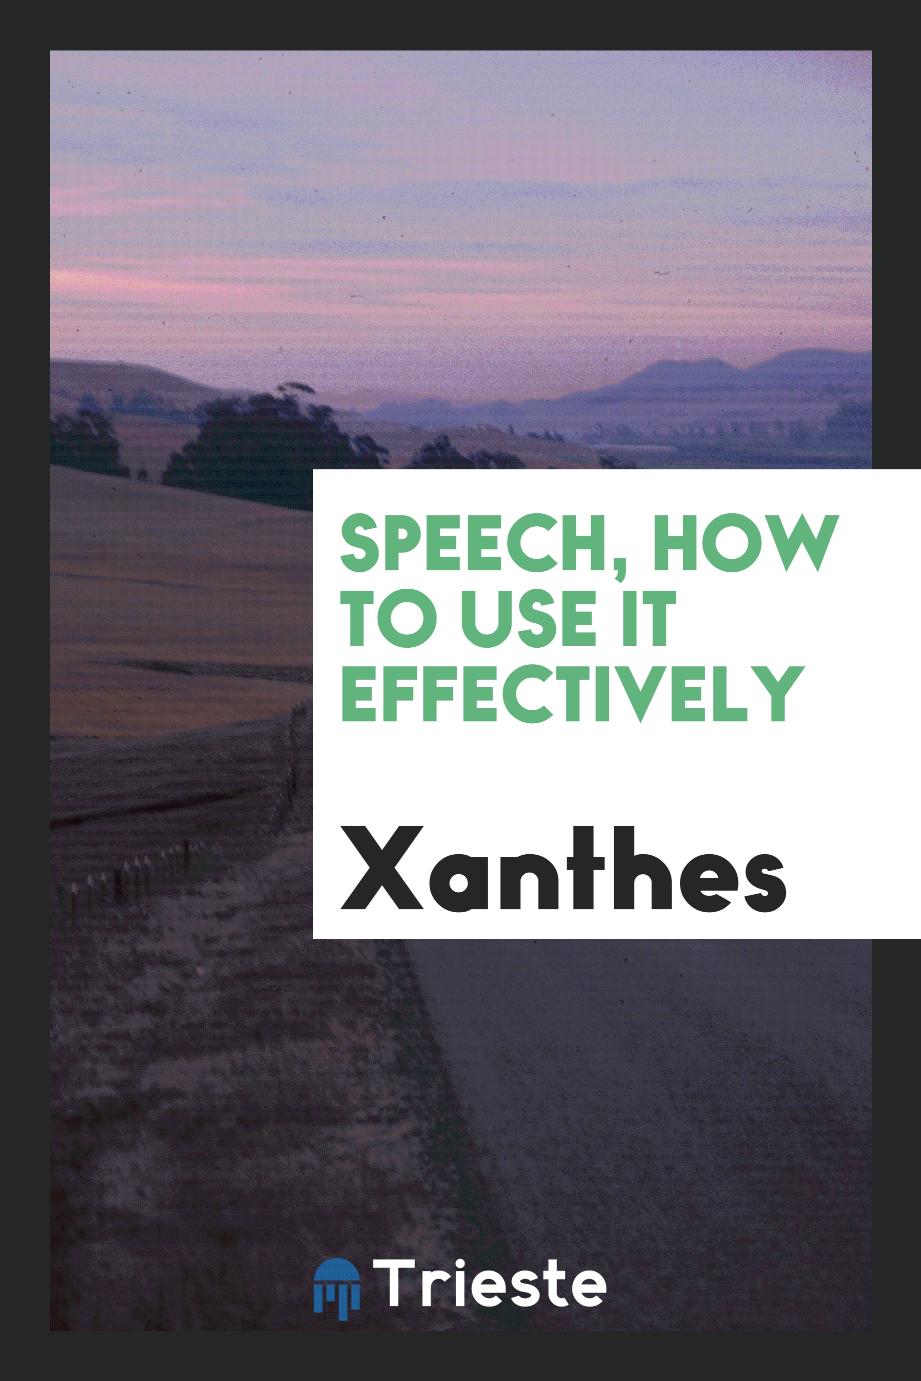 Speech, how to use it effectively